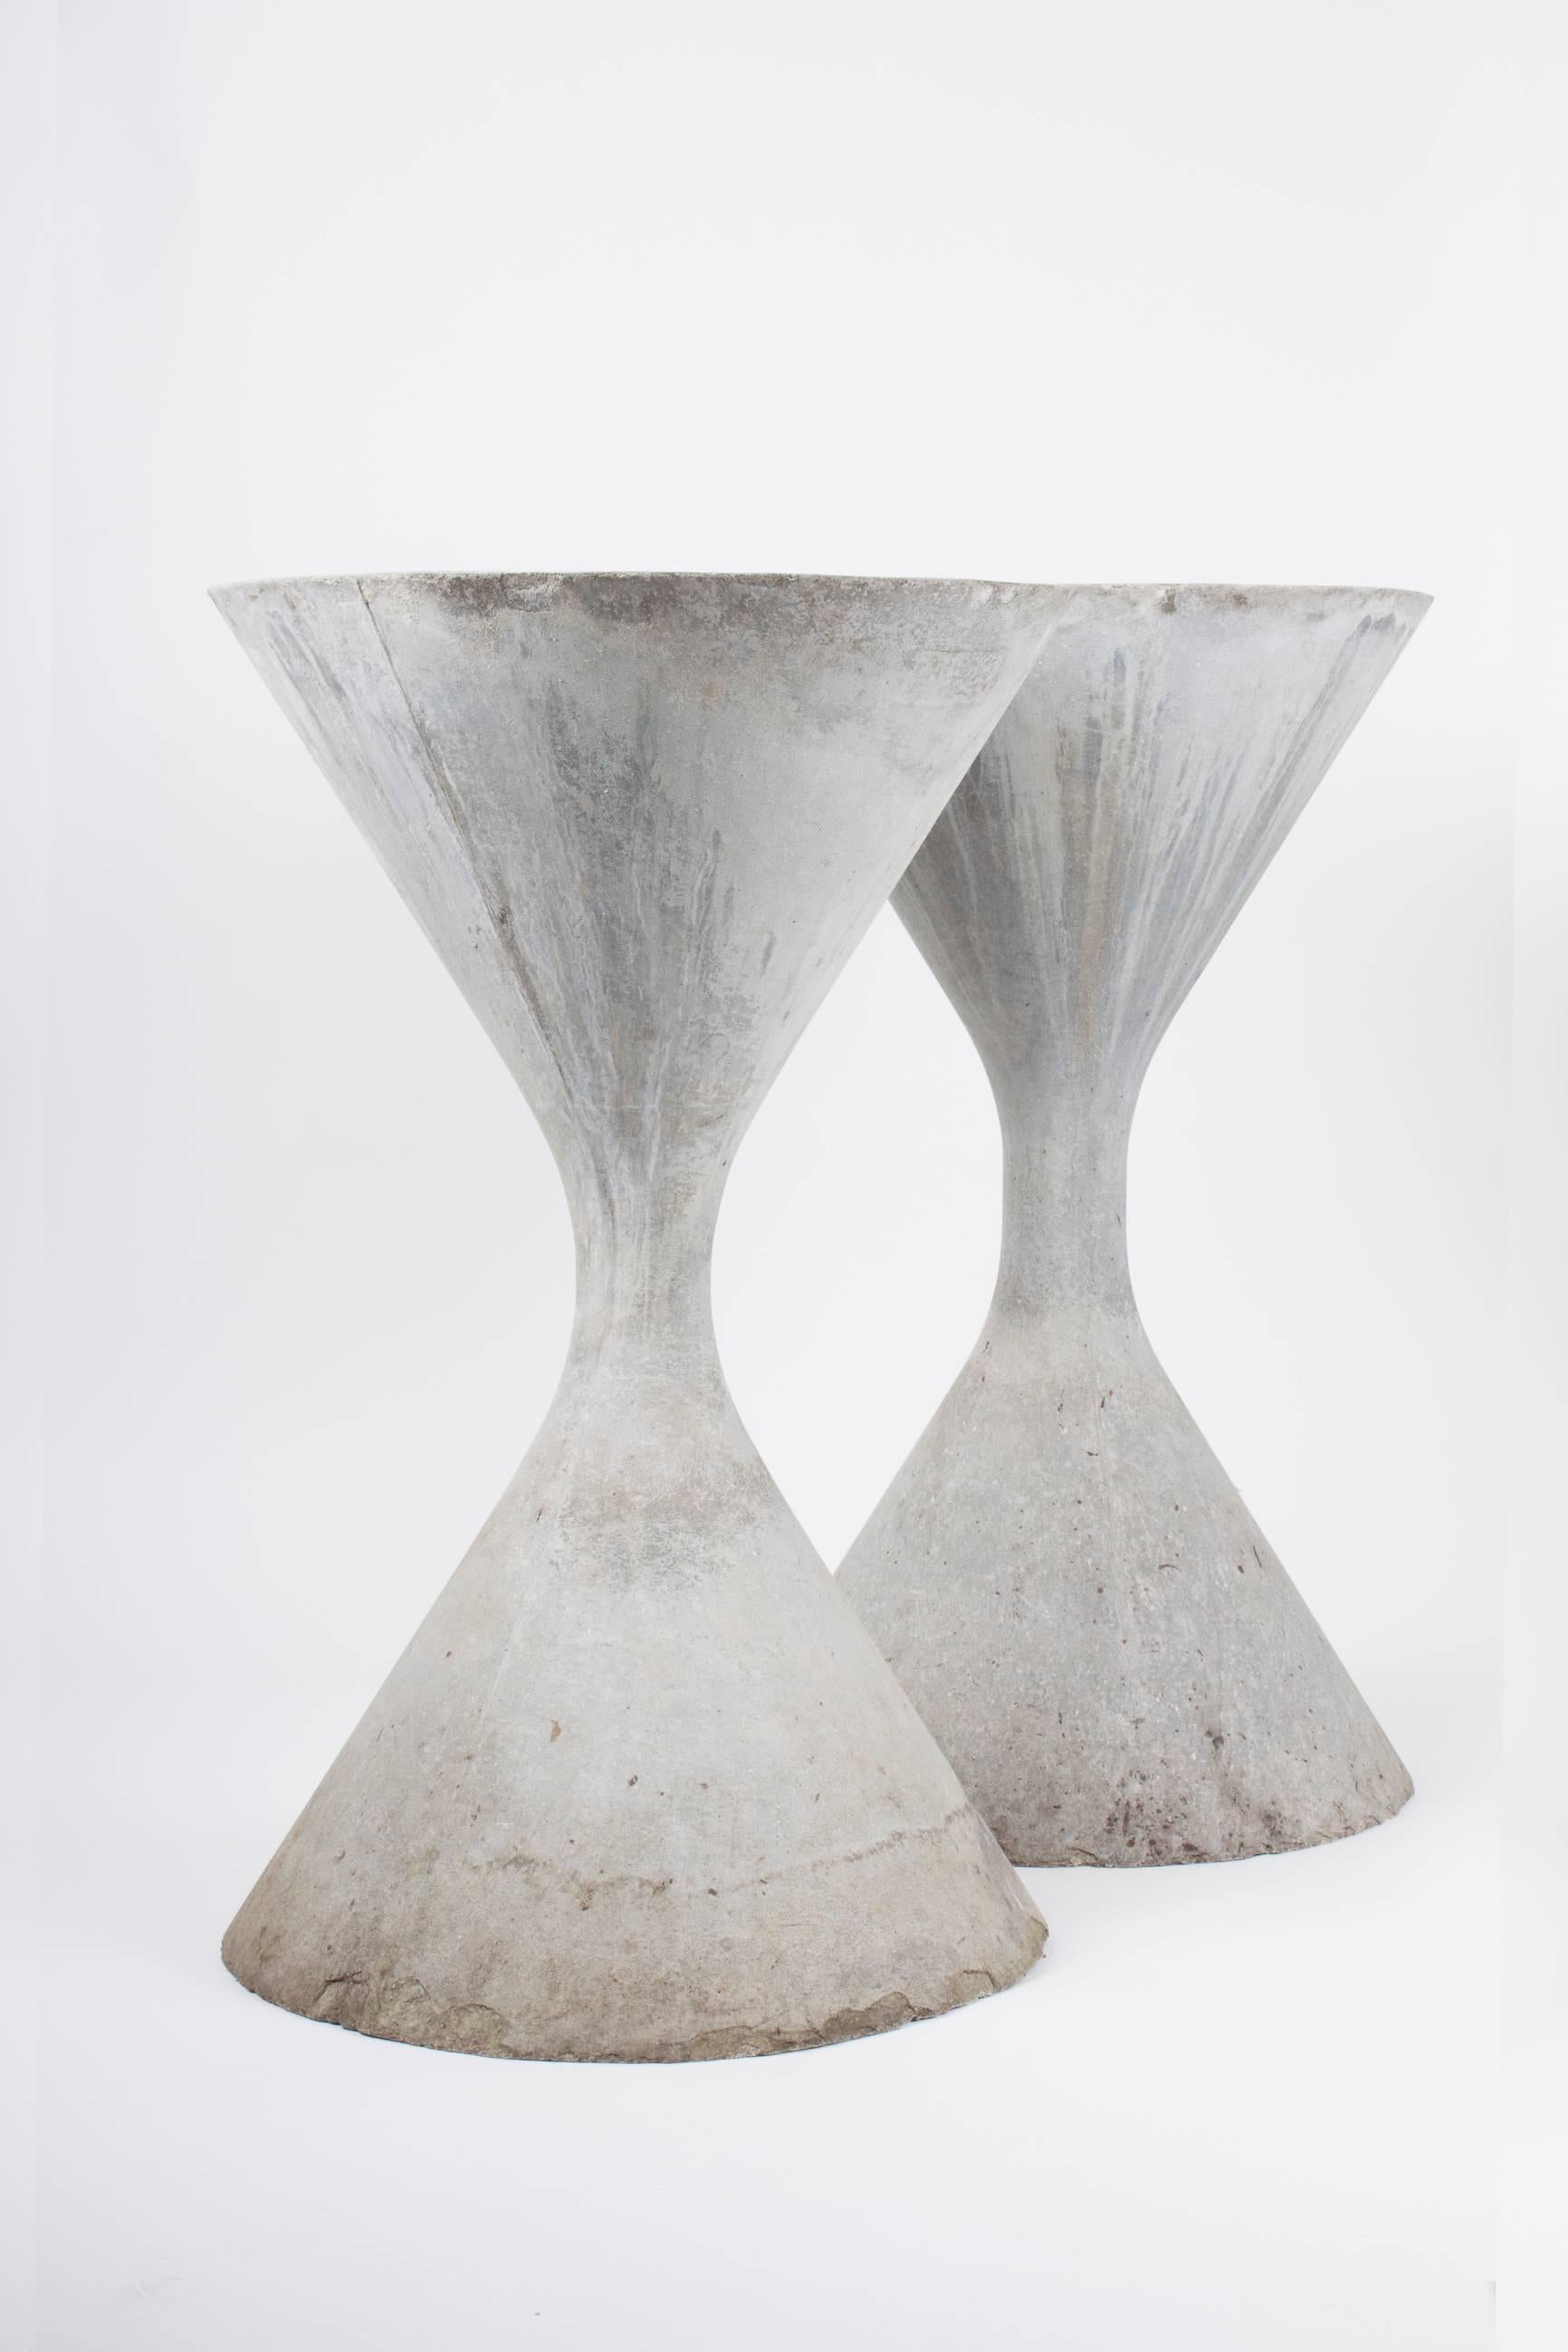 A fantastic pair of concrete hourglass or spindel planters by the Swiss Architect, Willy Guhl. 

Great age, patina and coloring. Iconic sculptural planter or garden object. Priced as a pair. Please find our other listings for Guhl planters as